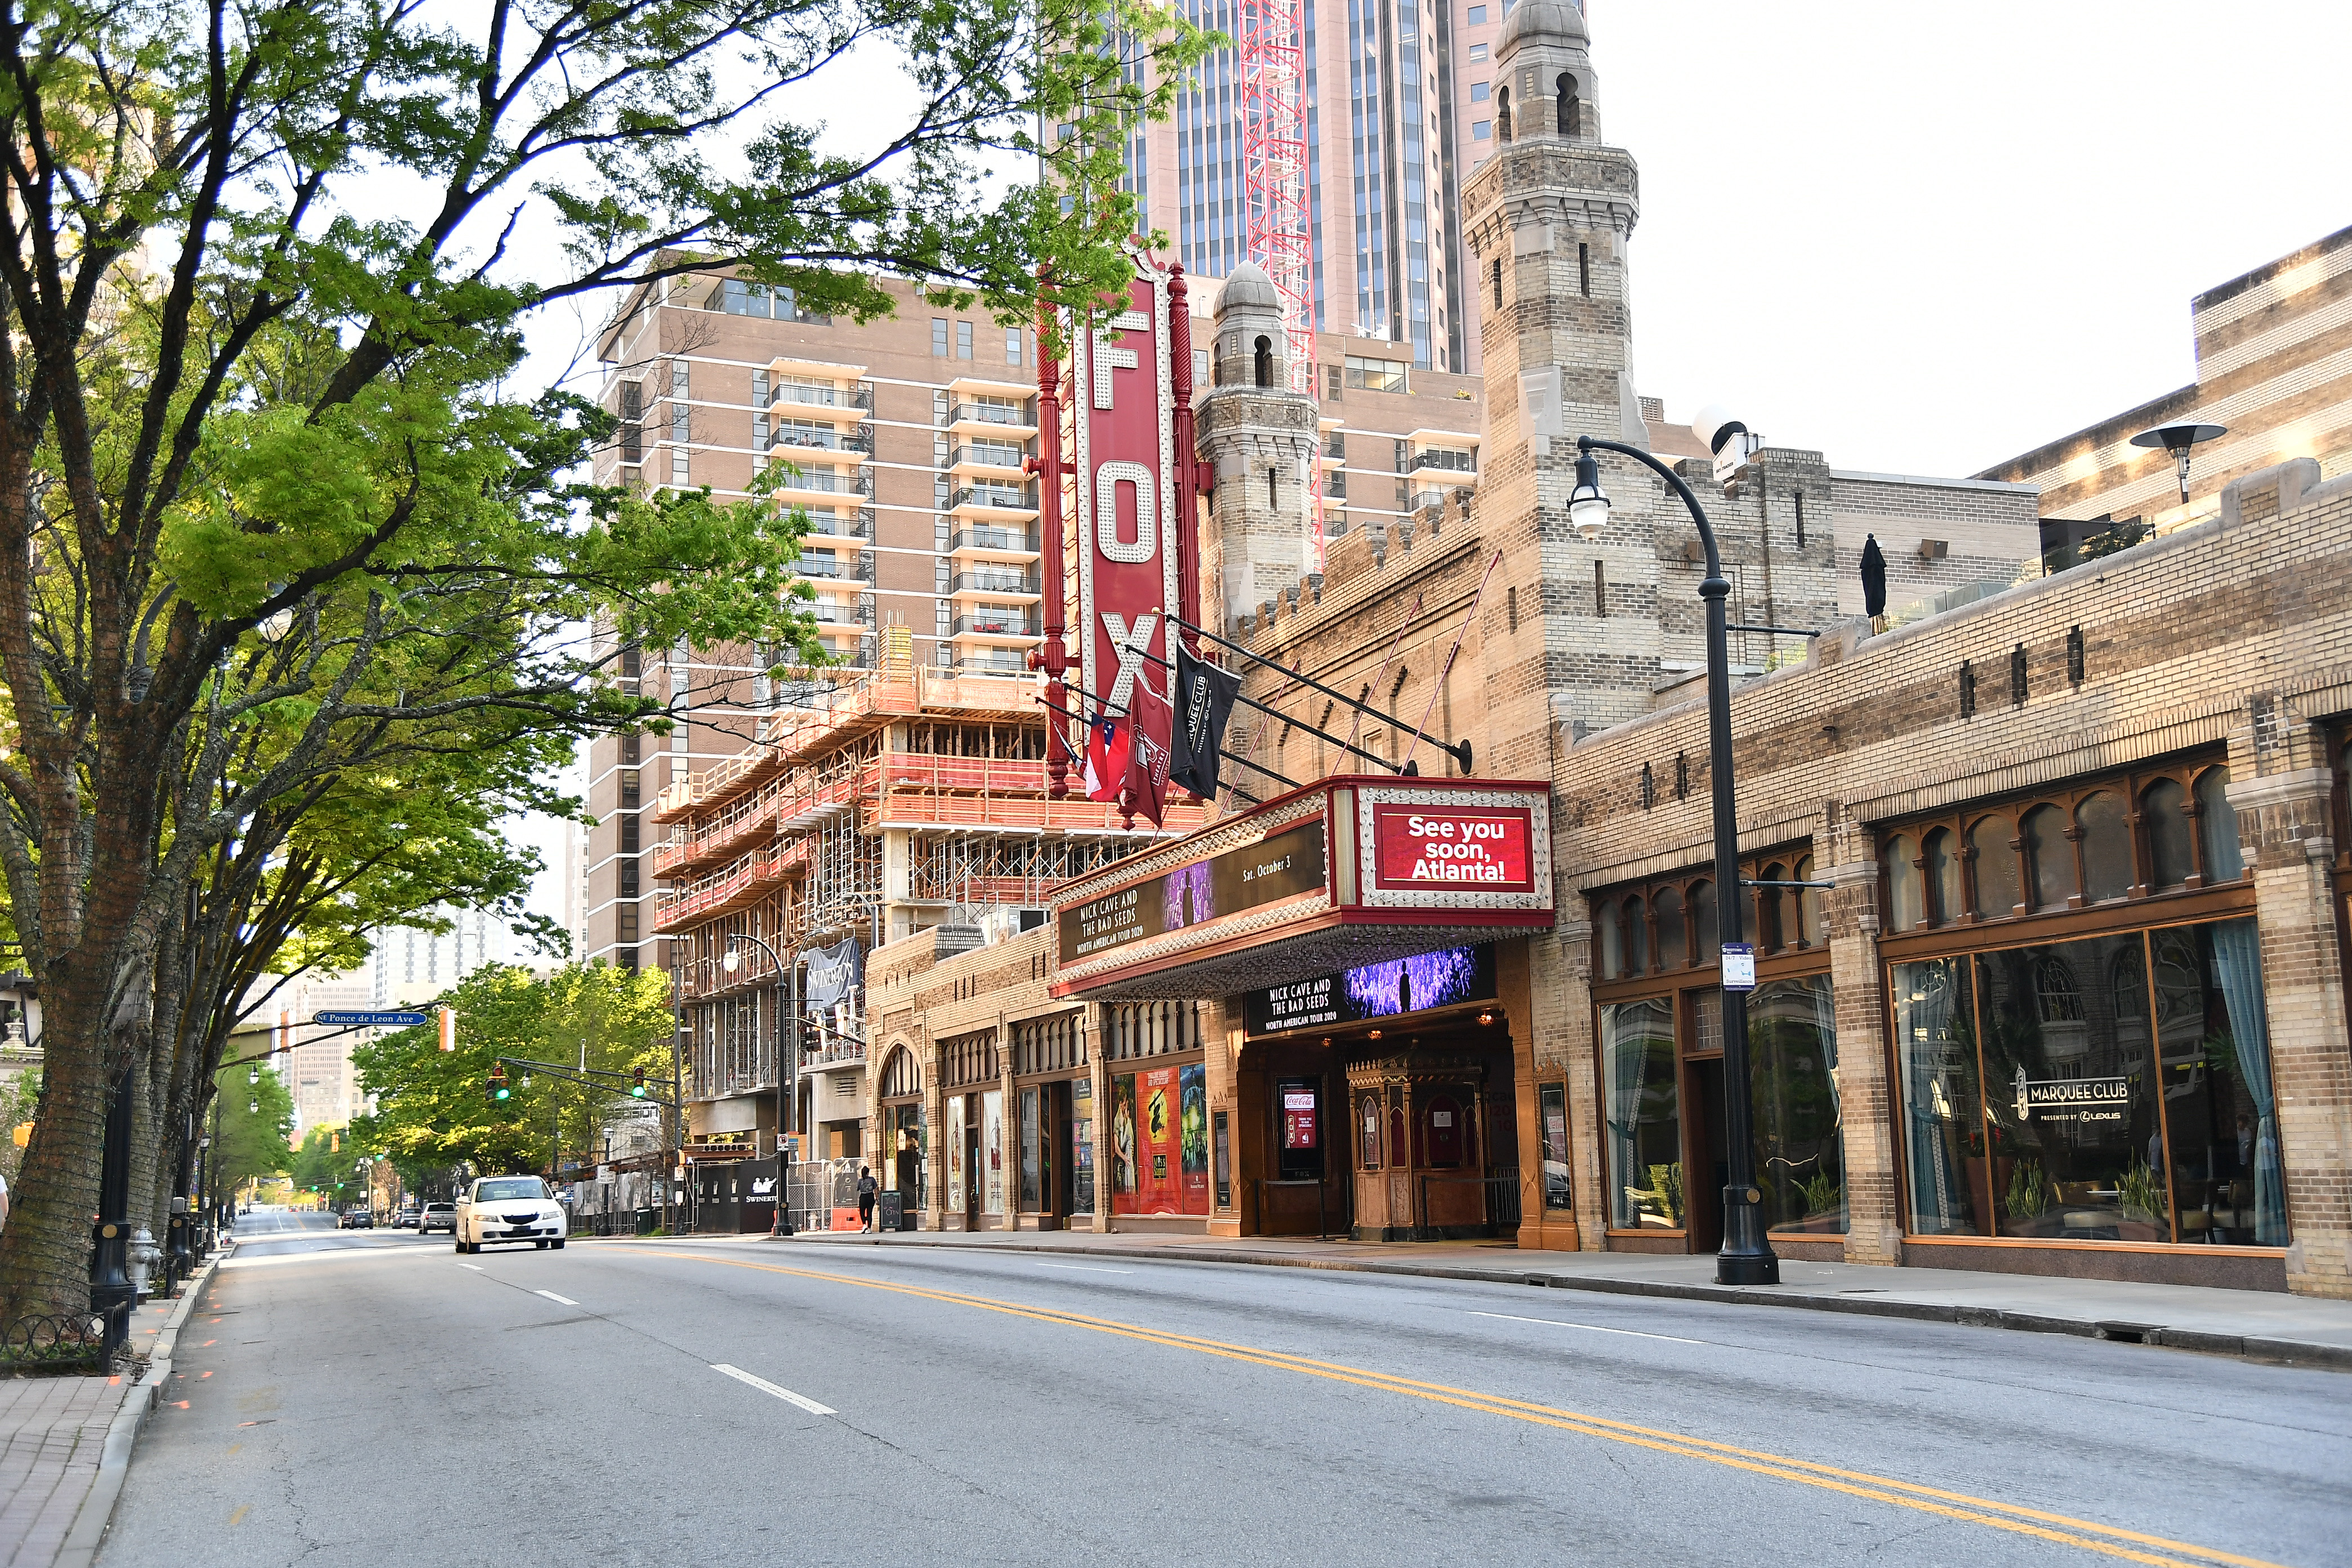 A view of the Fox Theater on Peachtree Street as the coronavirus continues to spread across the United States on March 26, 2020 in Atlanta, Georgia. The World Health Organization declared coronavirus (COVID-19) a global pandemic on March 11th.